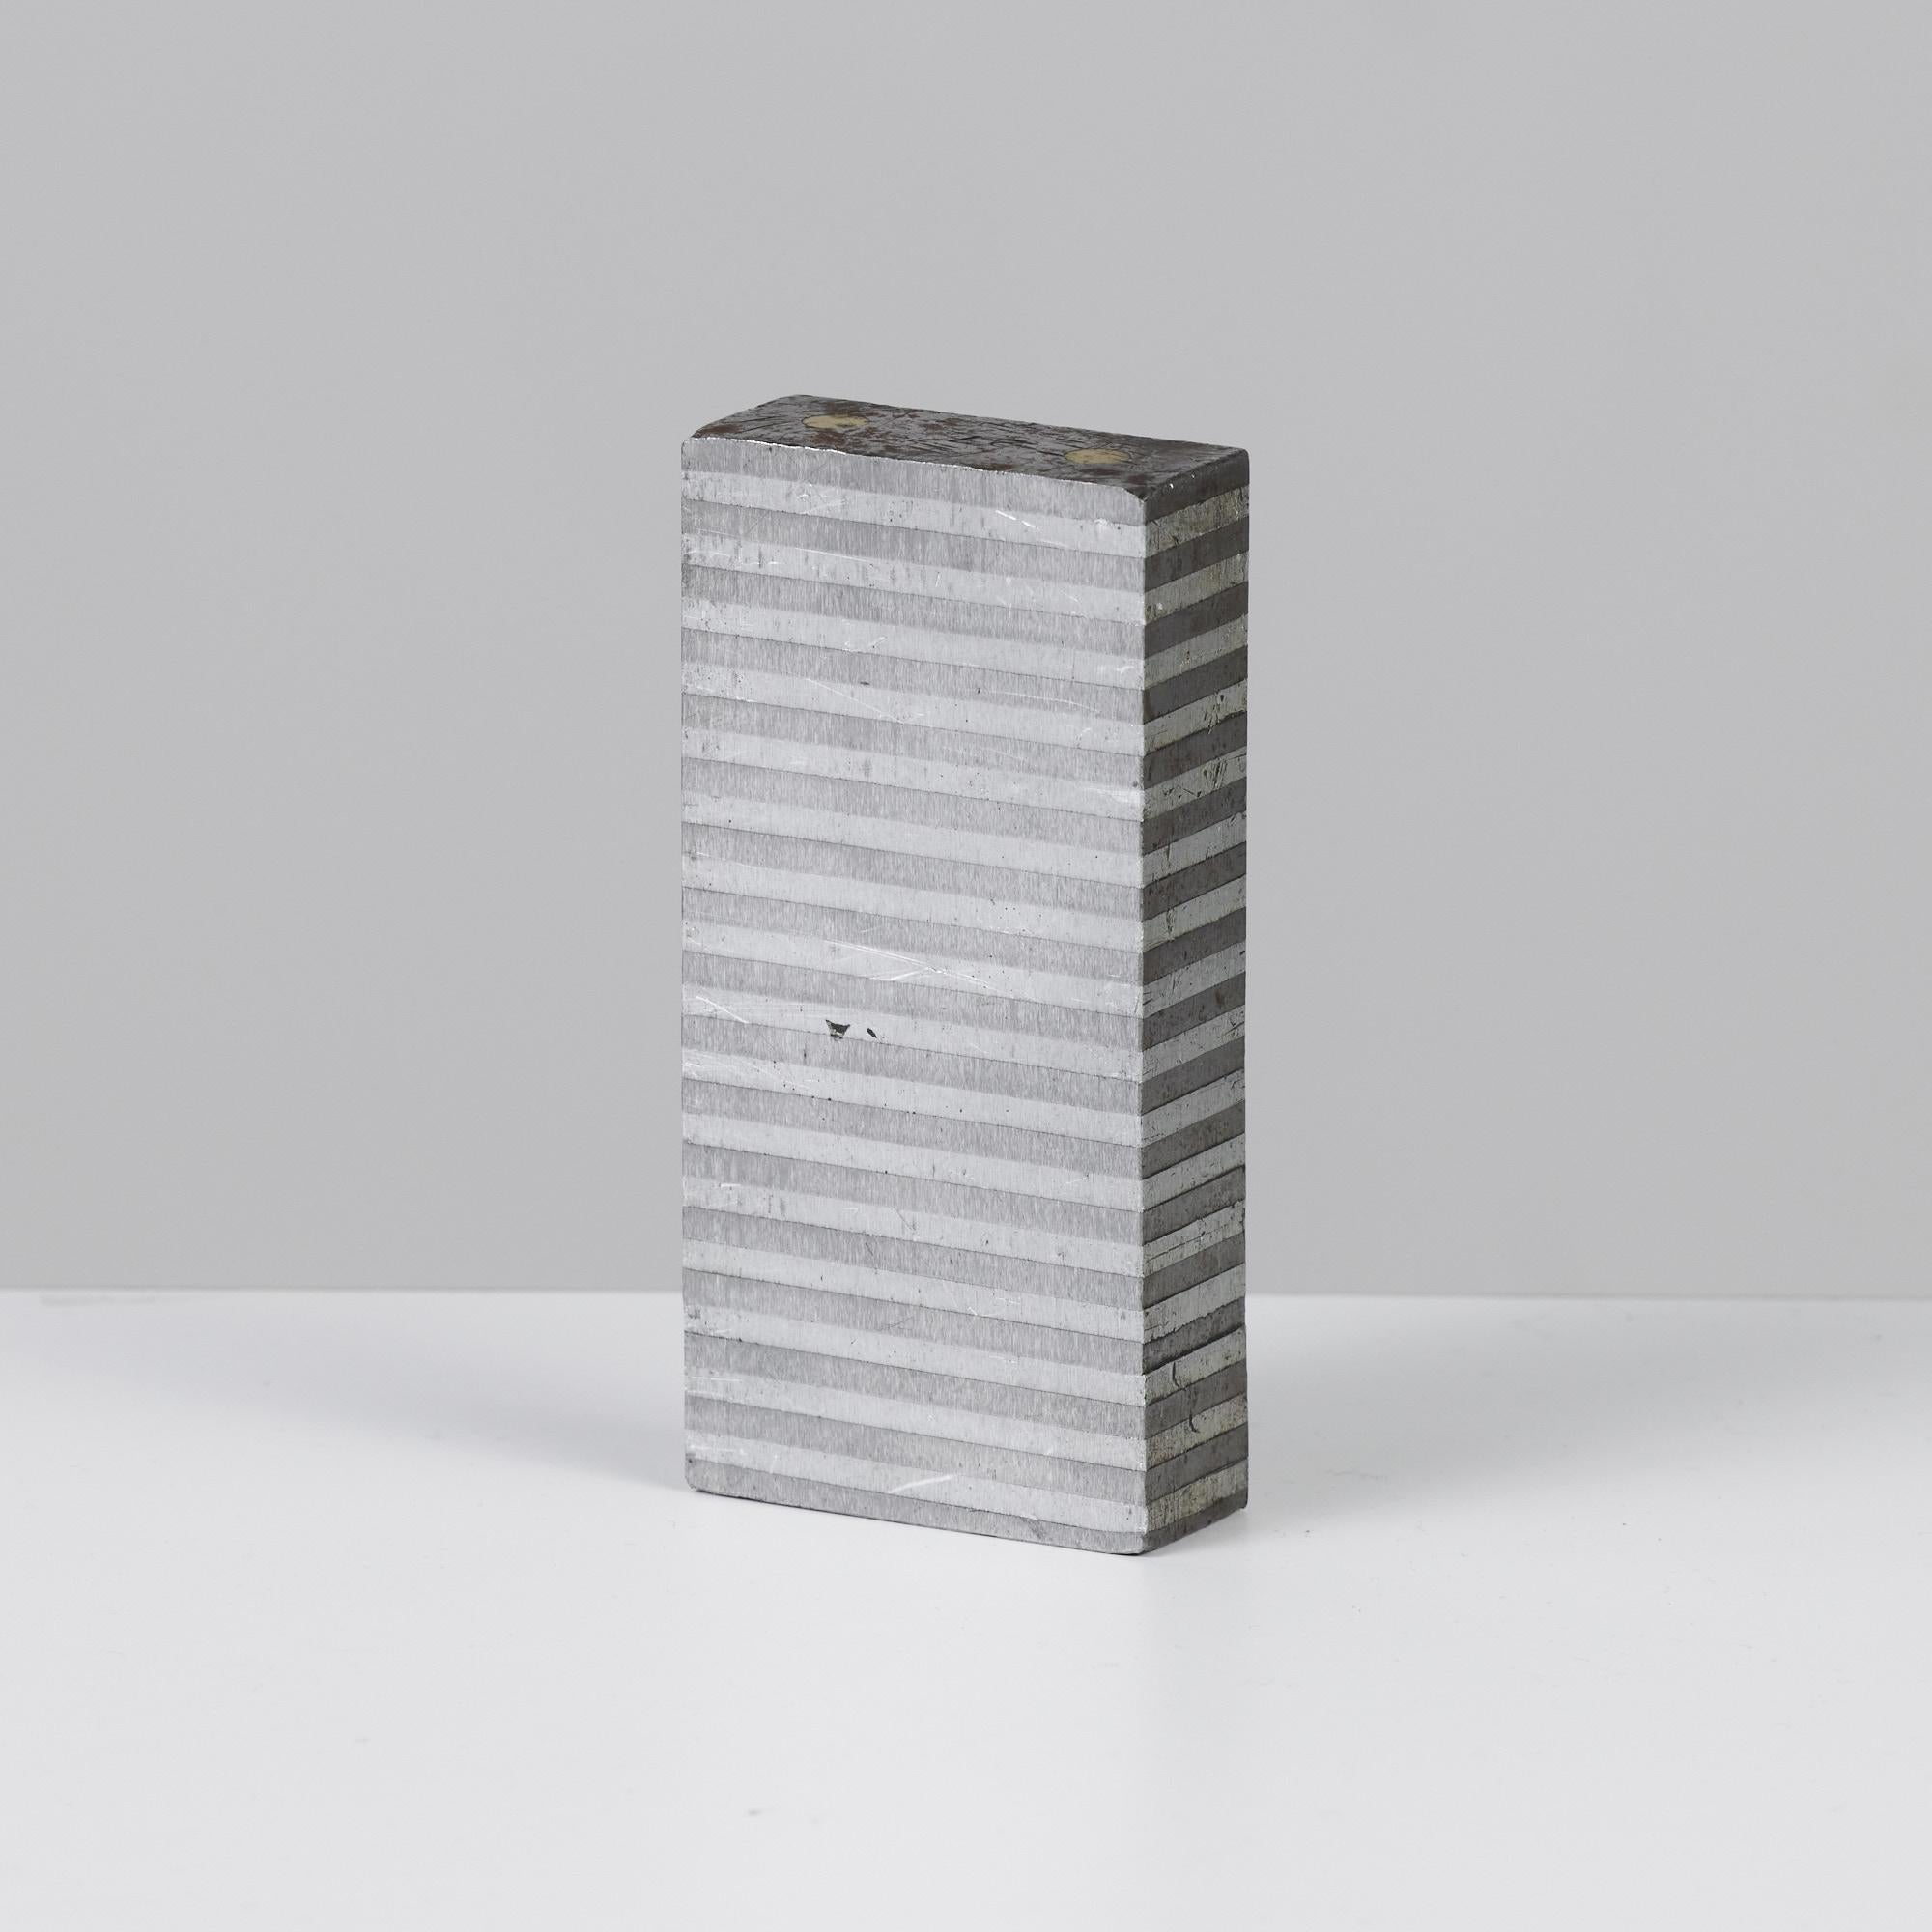 Industrial machine blocks. The brutalist form features alternating striations along the sides with two brass dots on either end. These geometric blocks can be used as bookends or as decorative elements.

Dimensions: 2